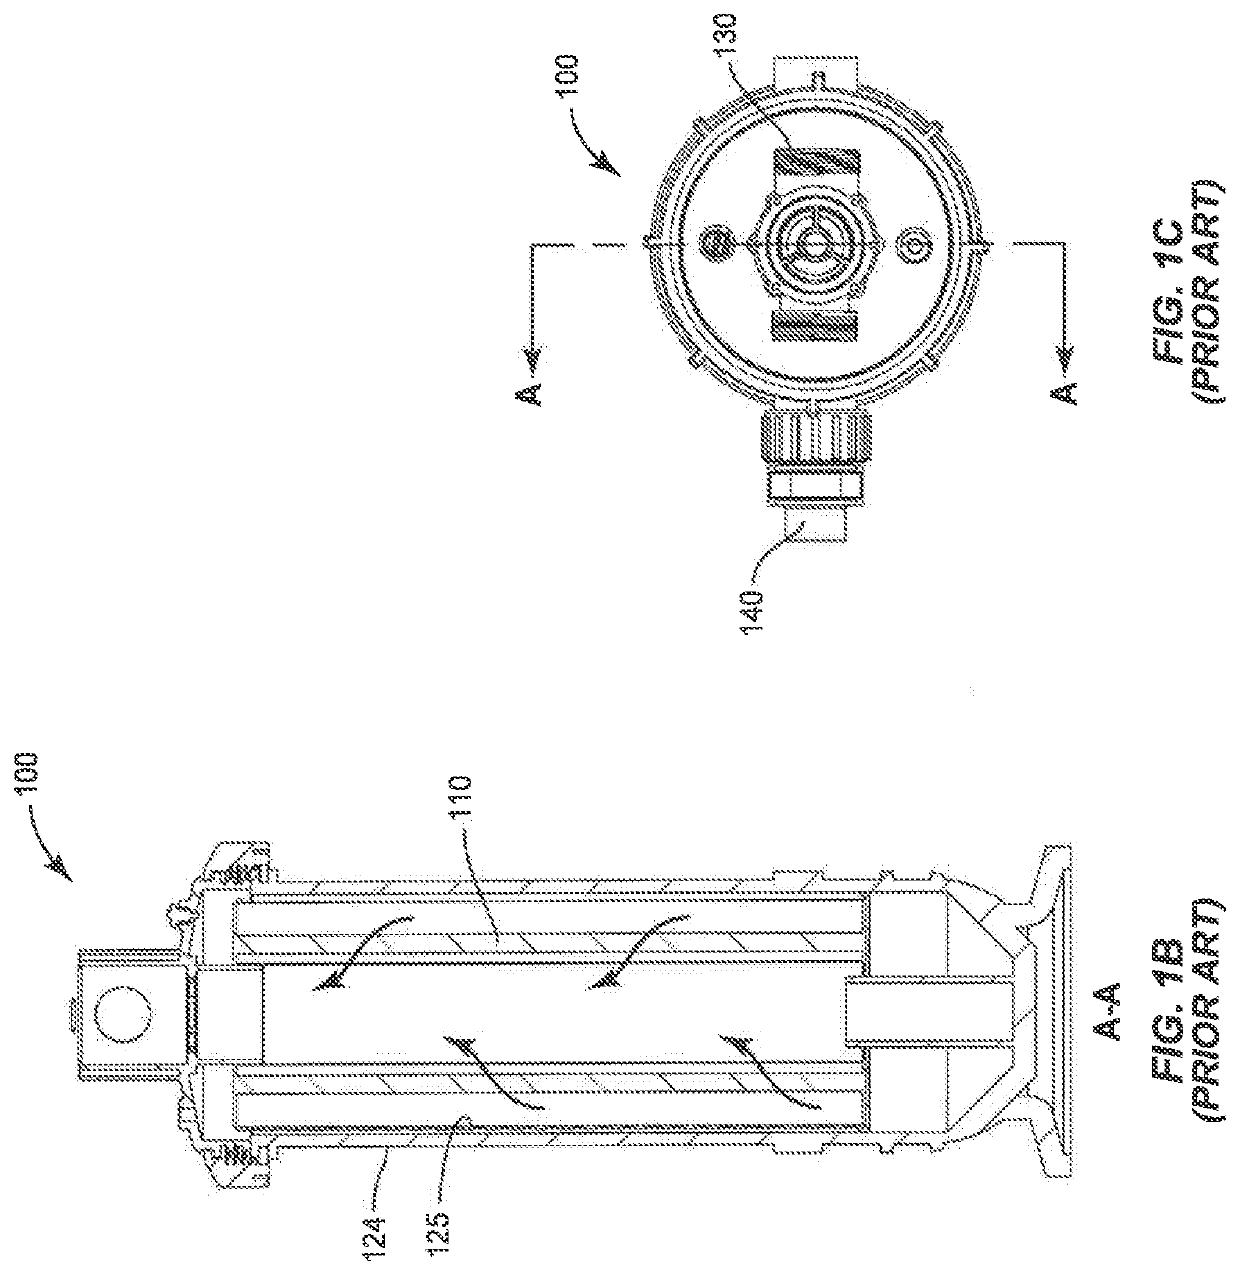 Self cleaning filter system and method